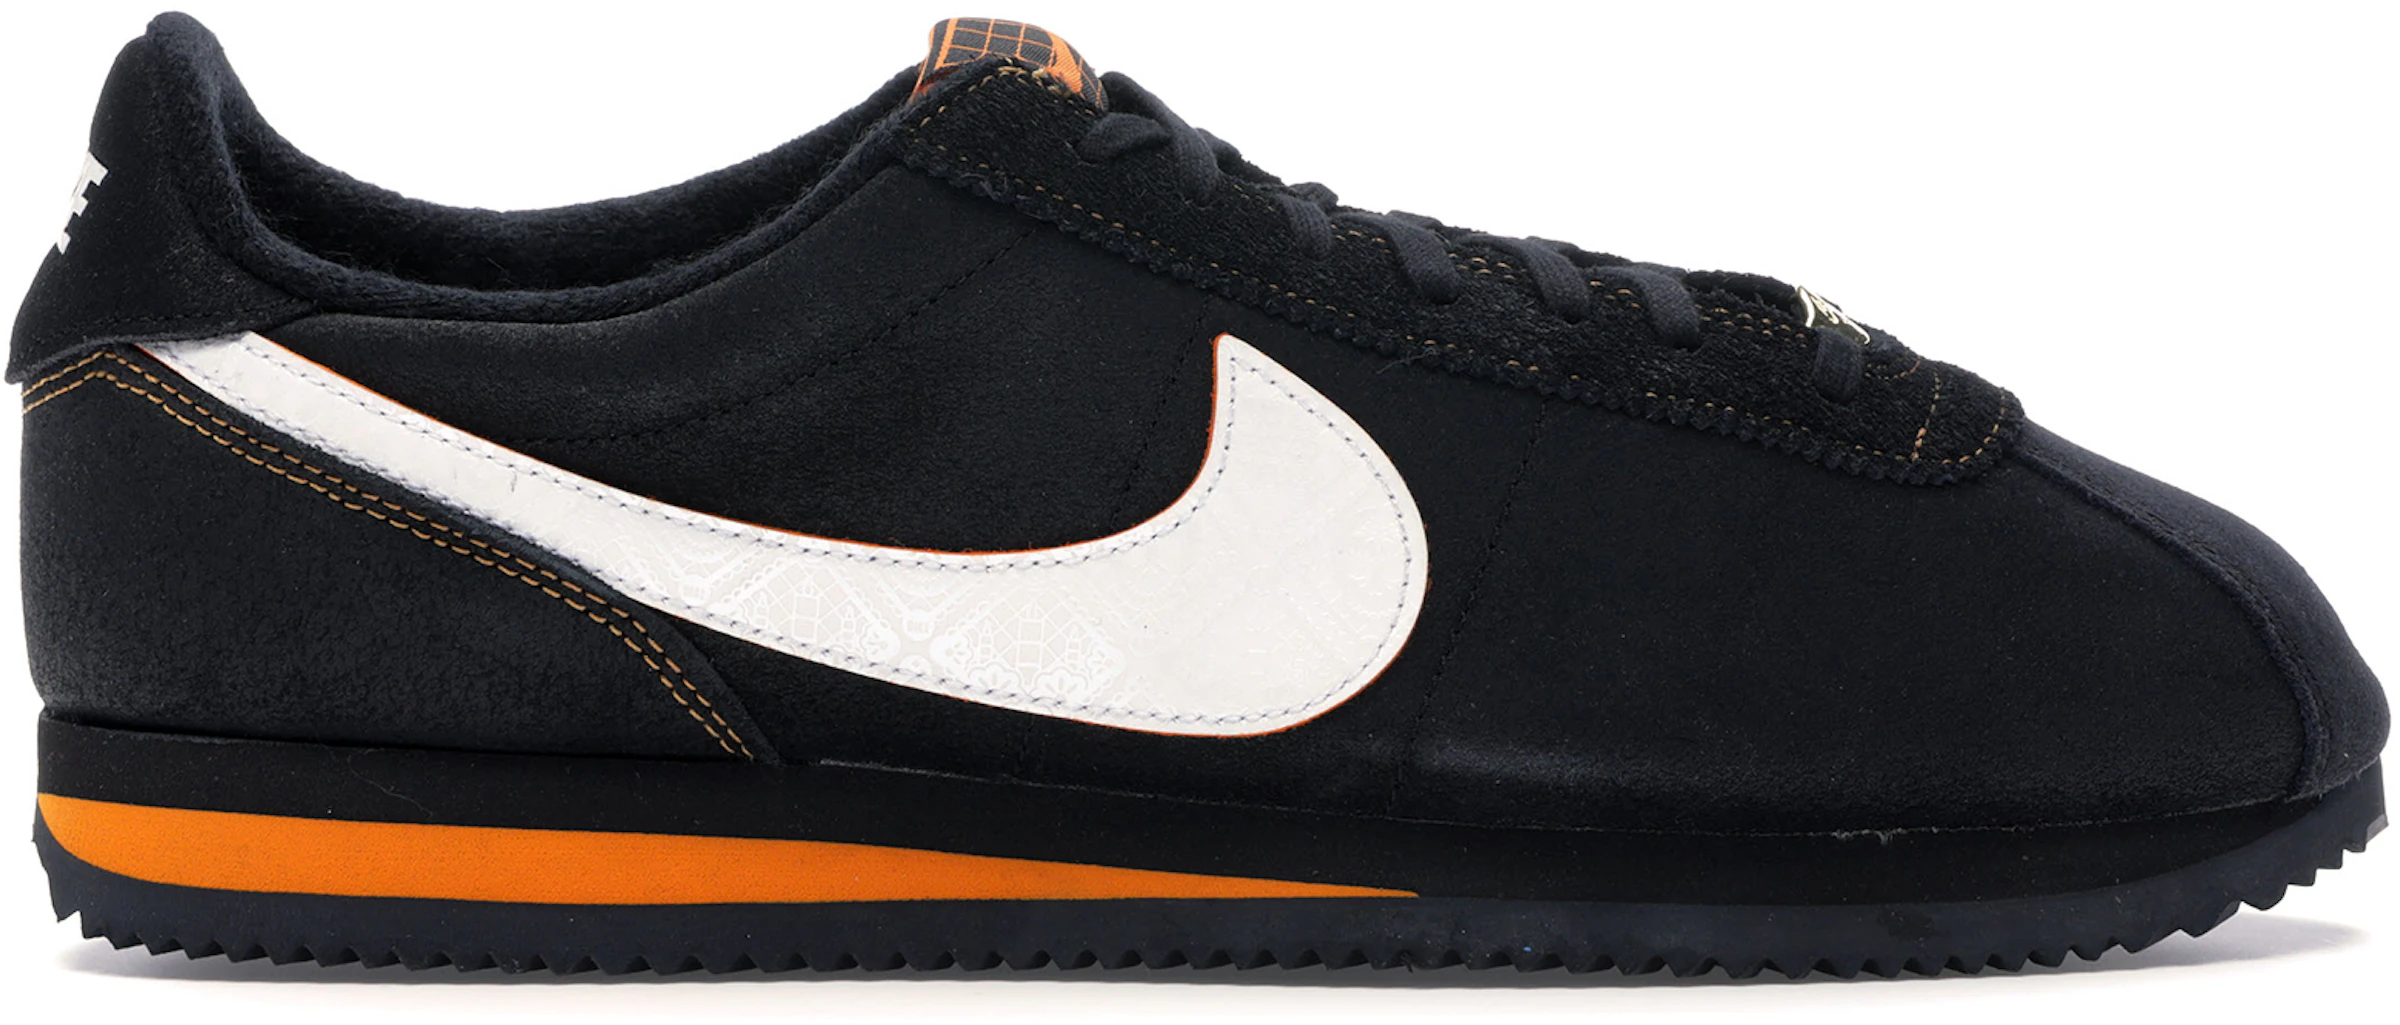 Buy Nike Cortez Shoes & New Sneakers - StockX